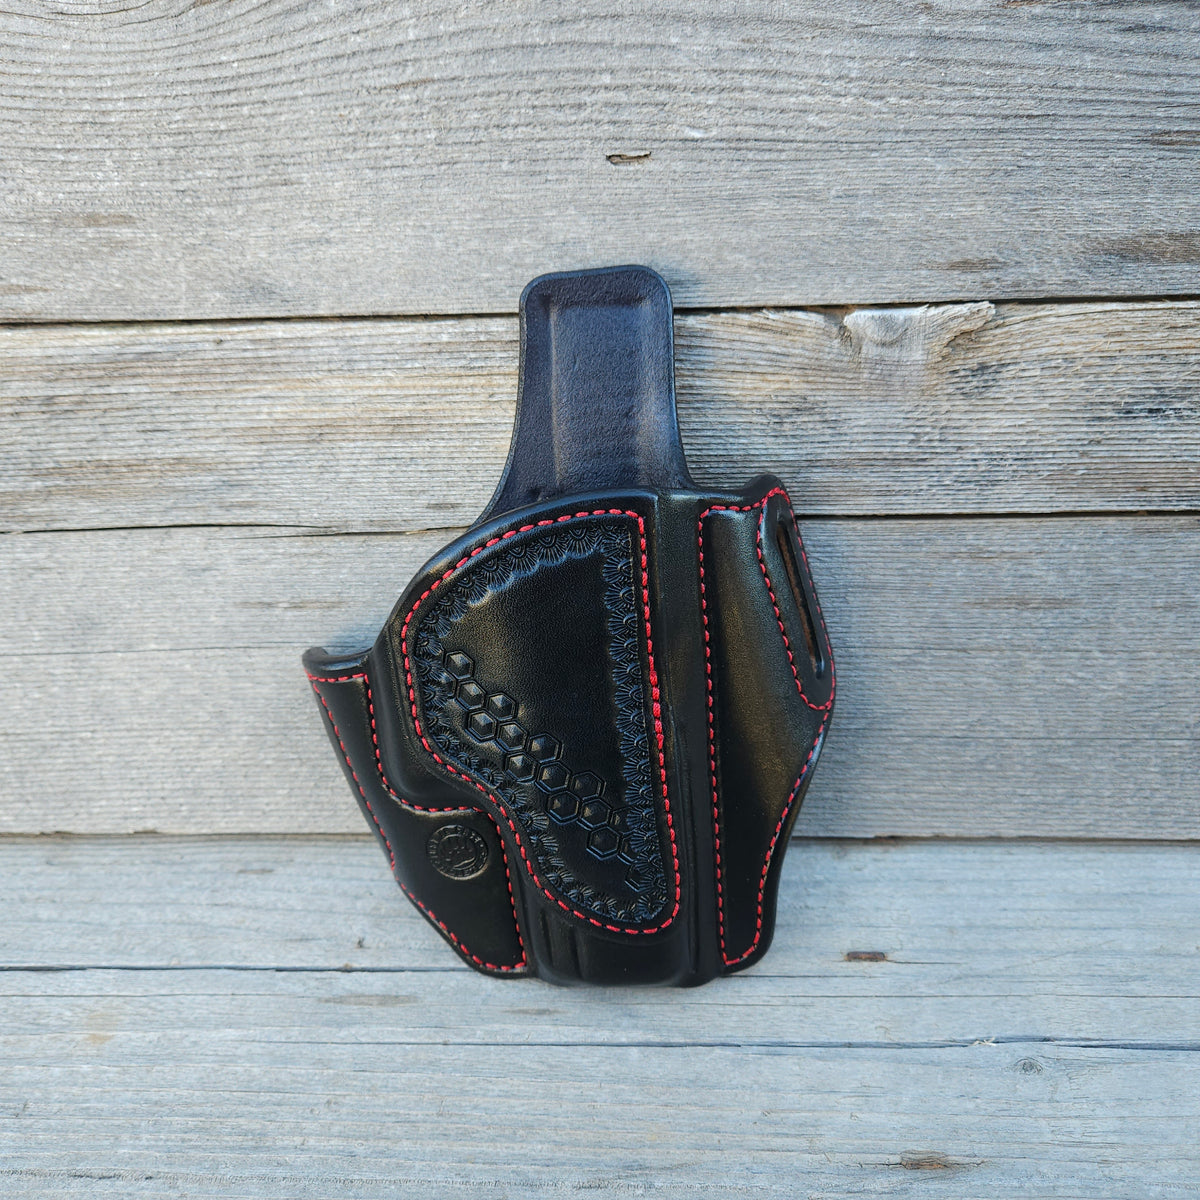 Glock 19/23 CLassic Holster All Black with Red Stitching and Partial Hex Stamp